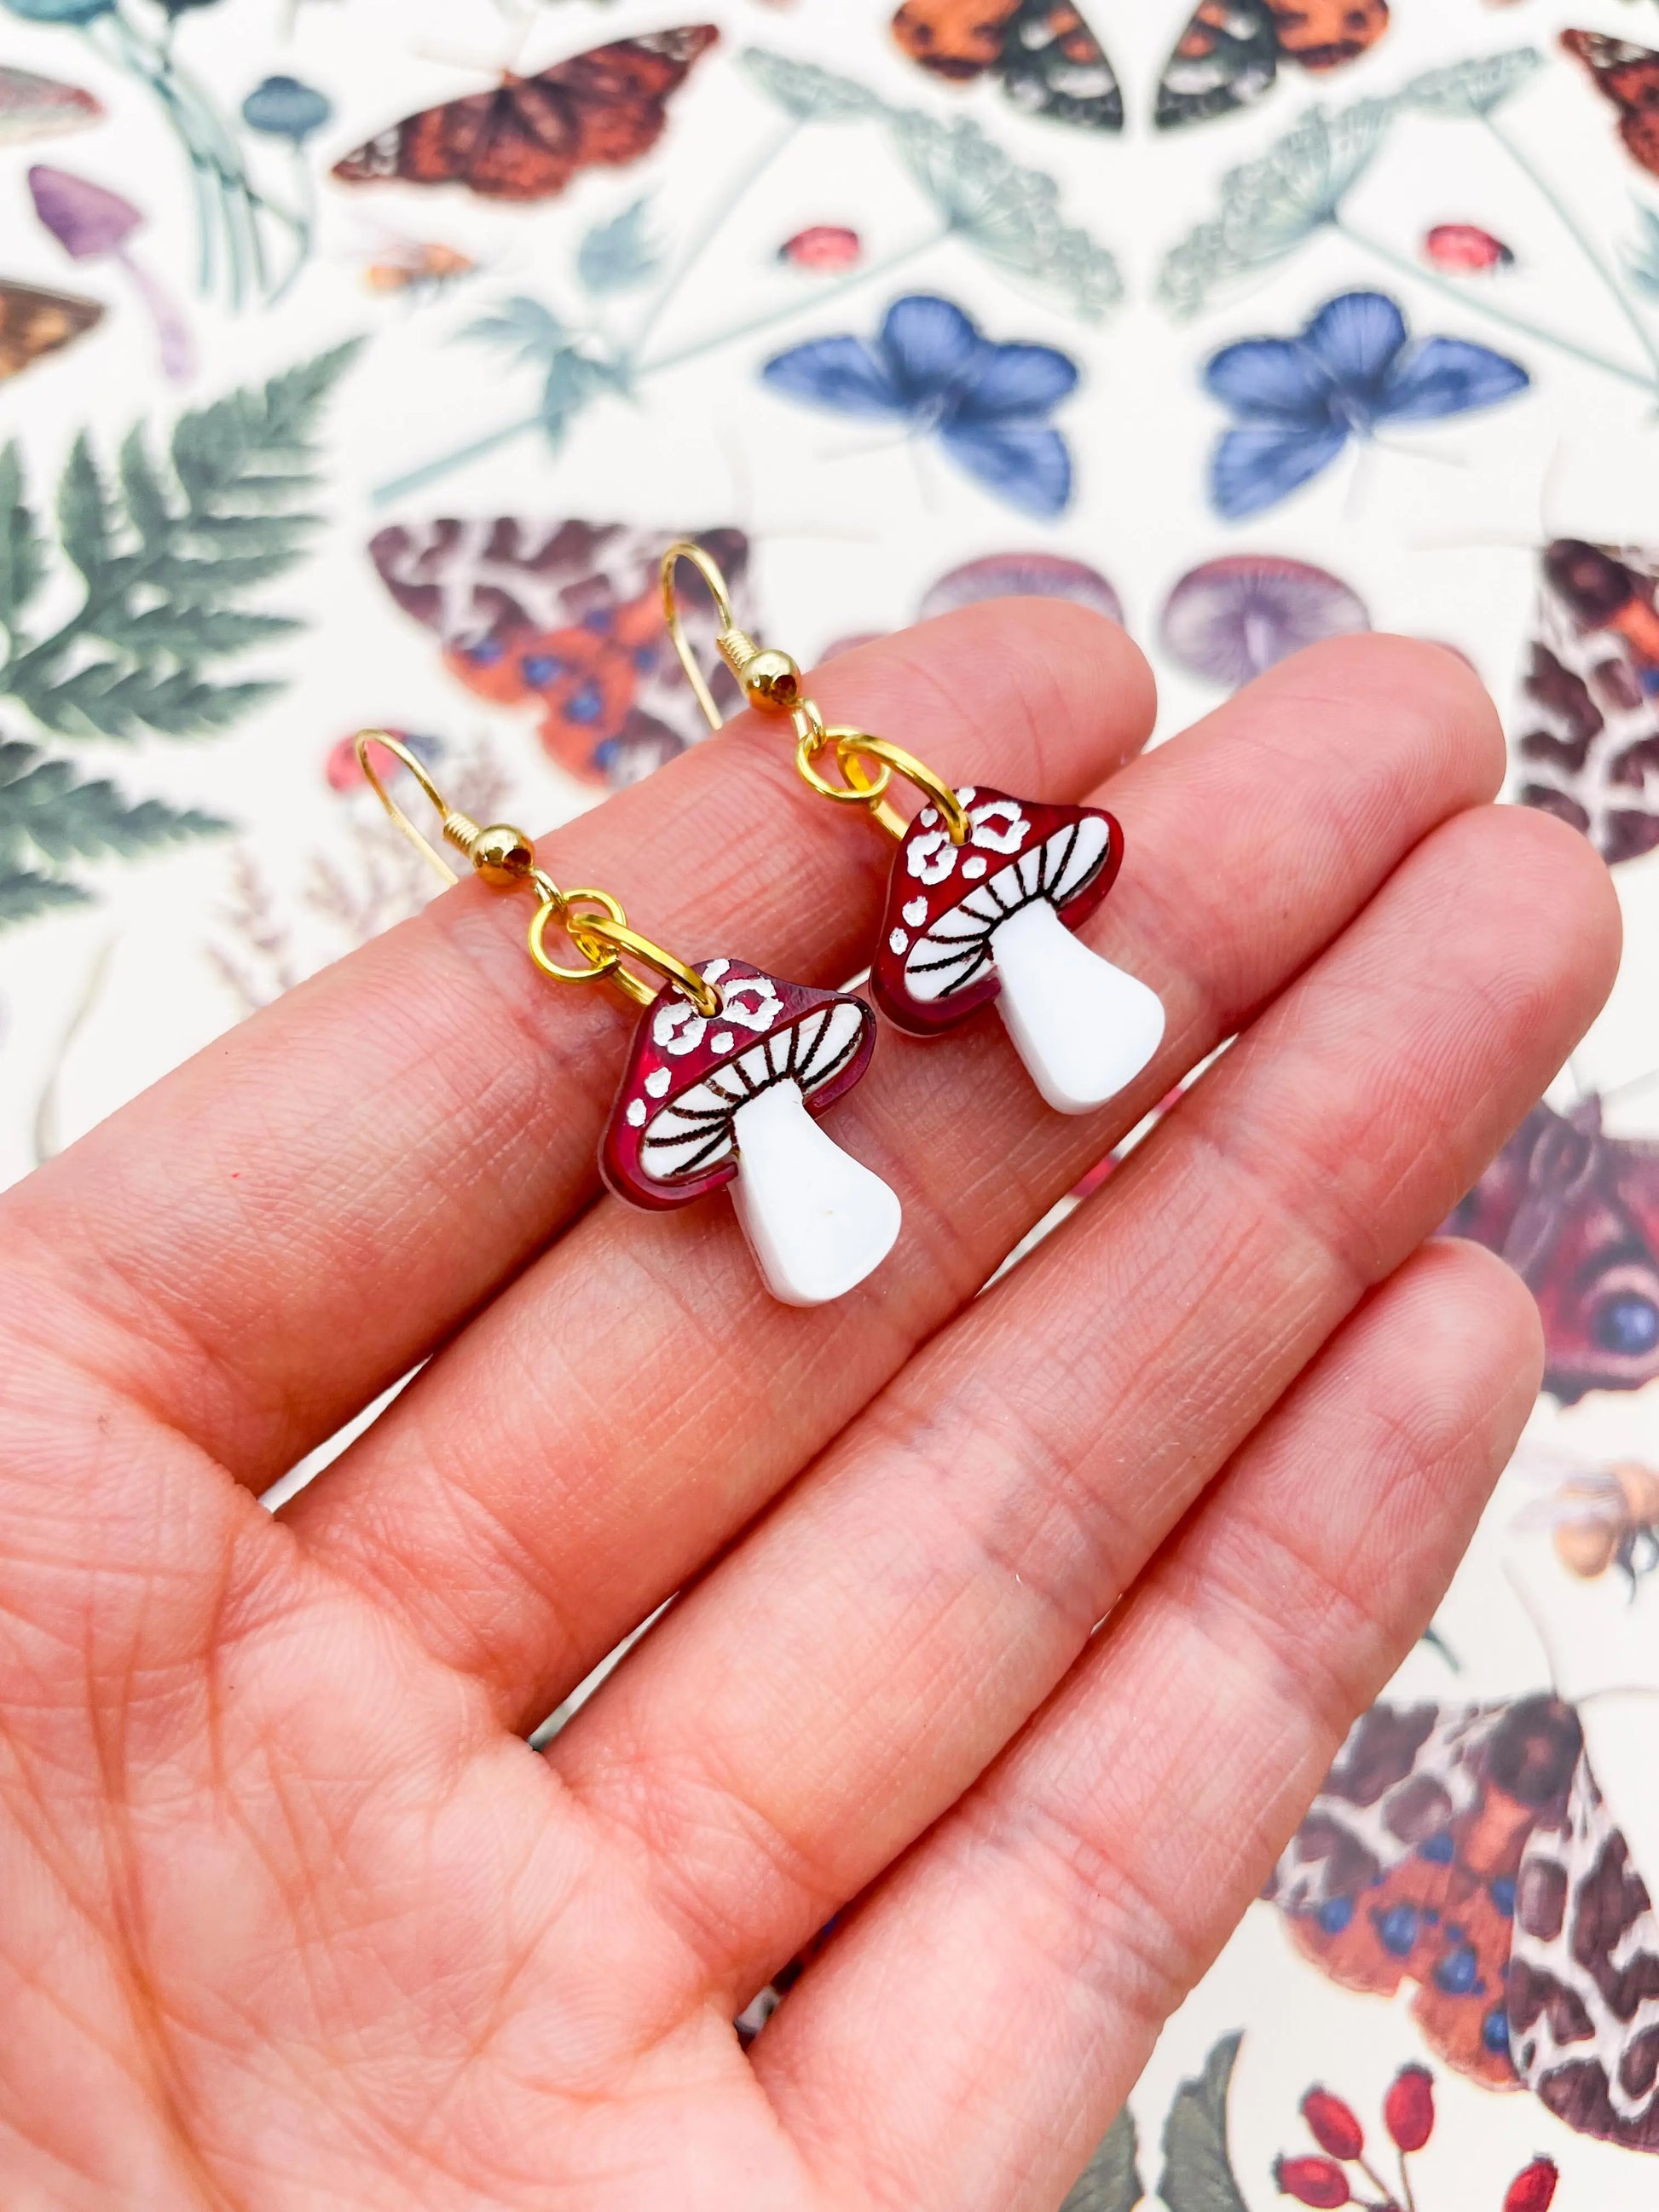 Medium Red and White Marble Acrylic Leopard Print Mushroom Dangle Earrings from Sapphire Frills